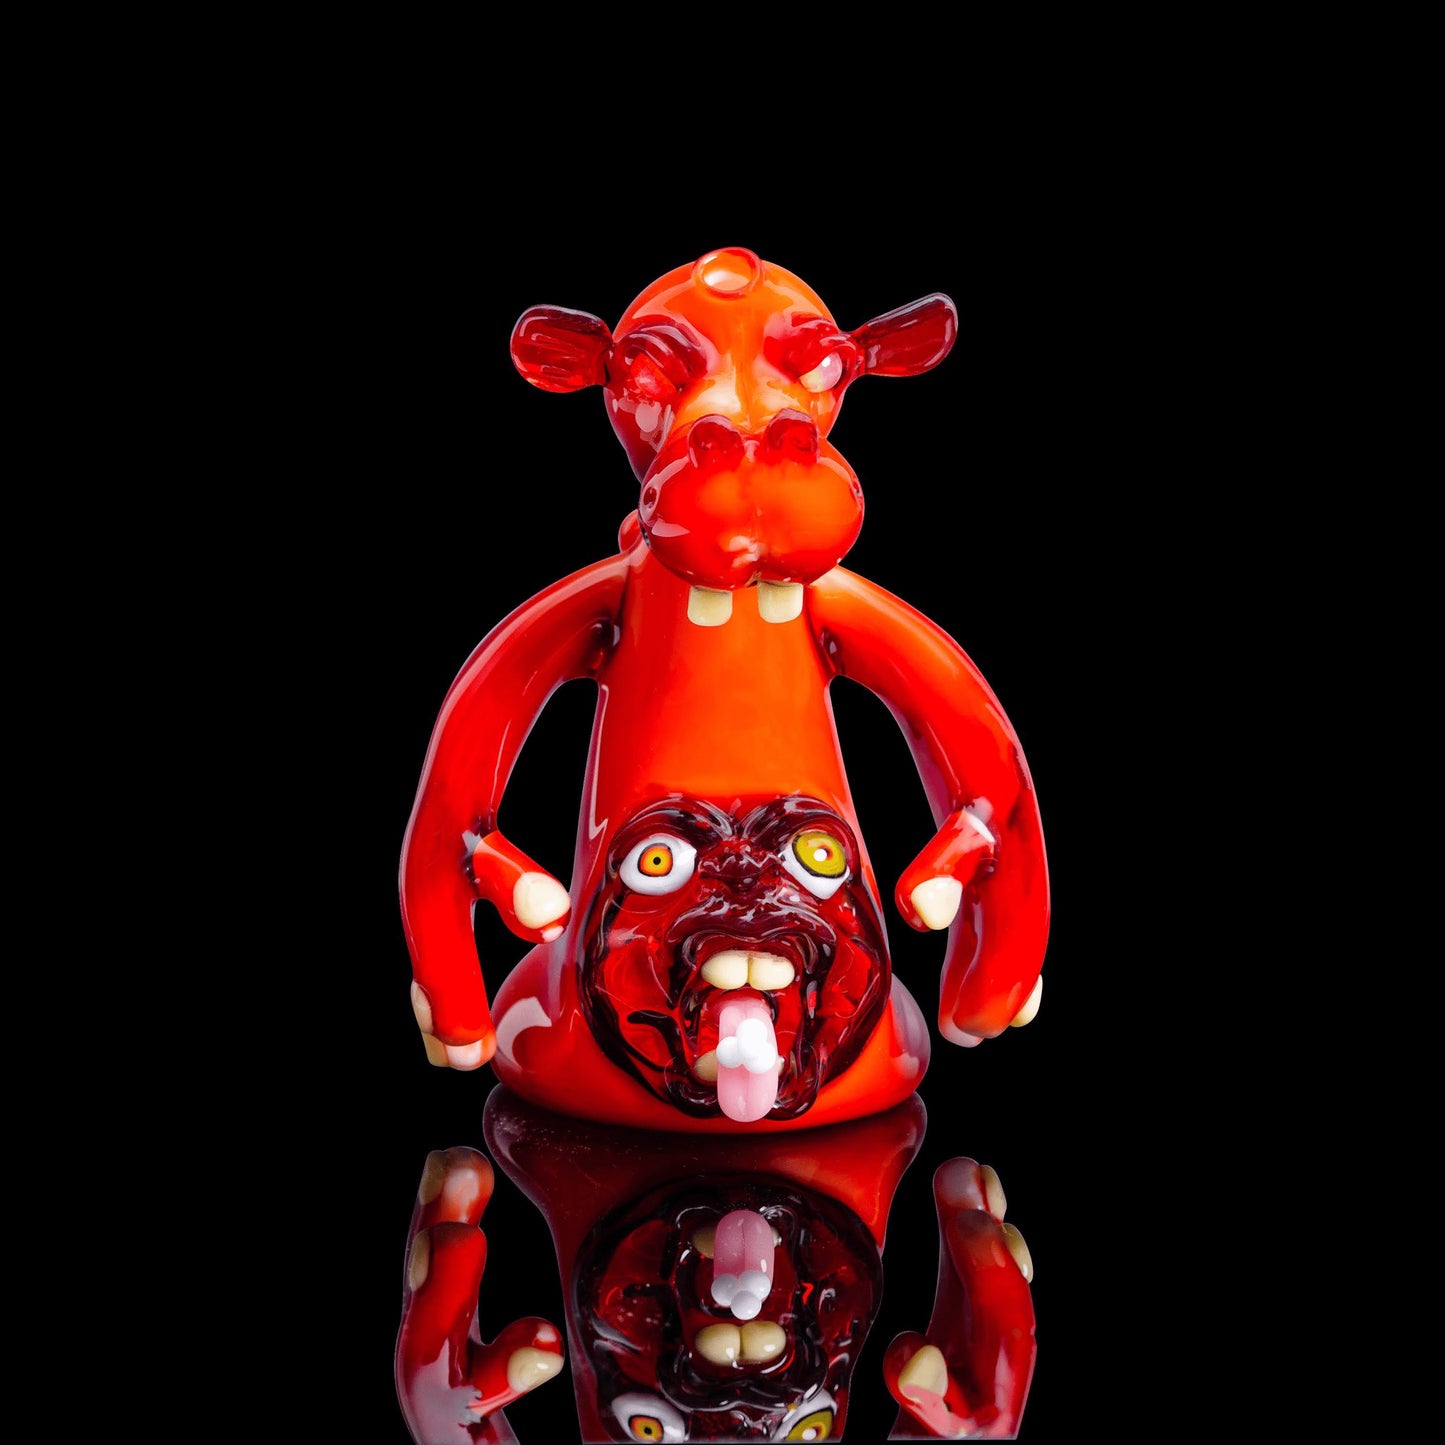 artisan-crafted art piece - Hangry Hangry Hippo Collab by Tony Kazy x Kaleb Folck (DFO)